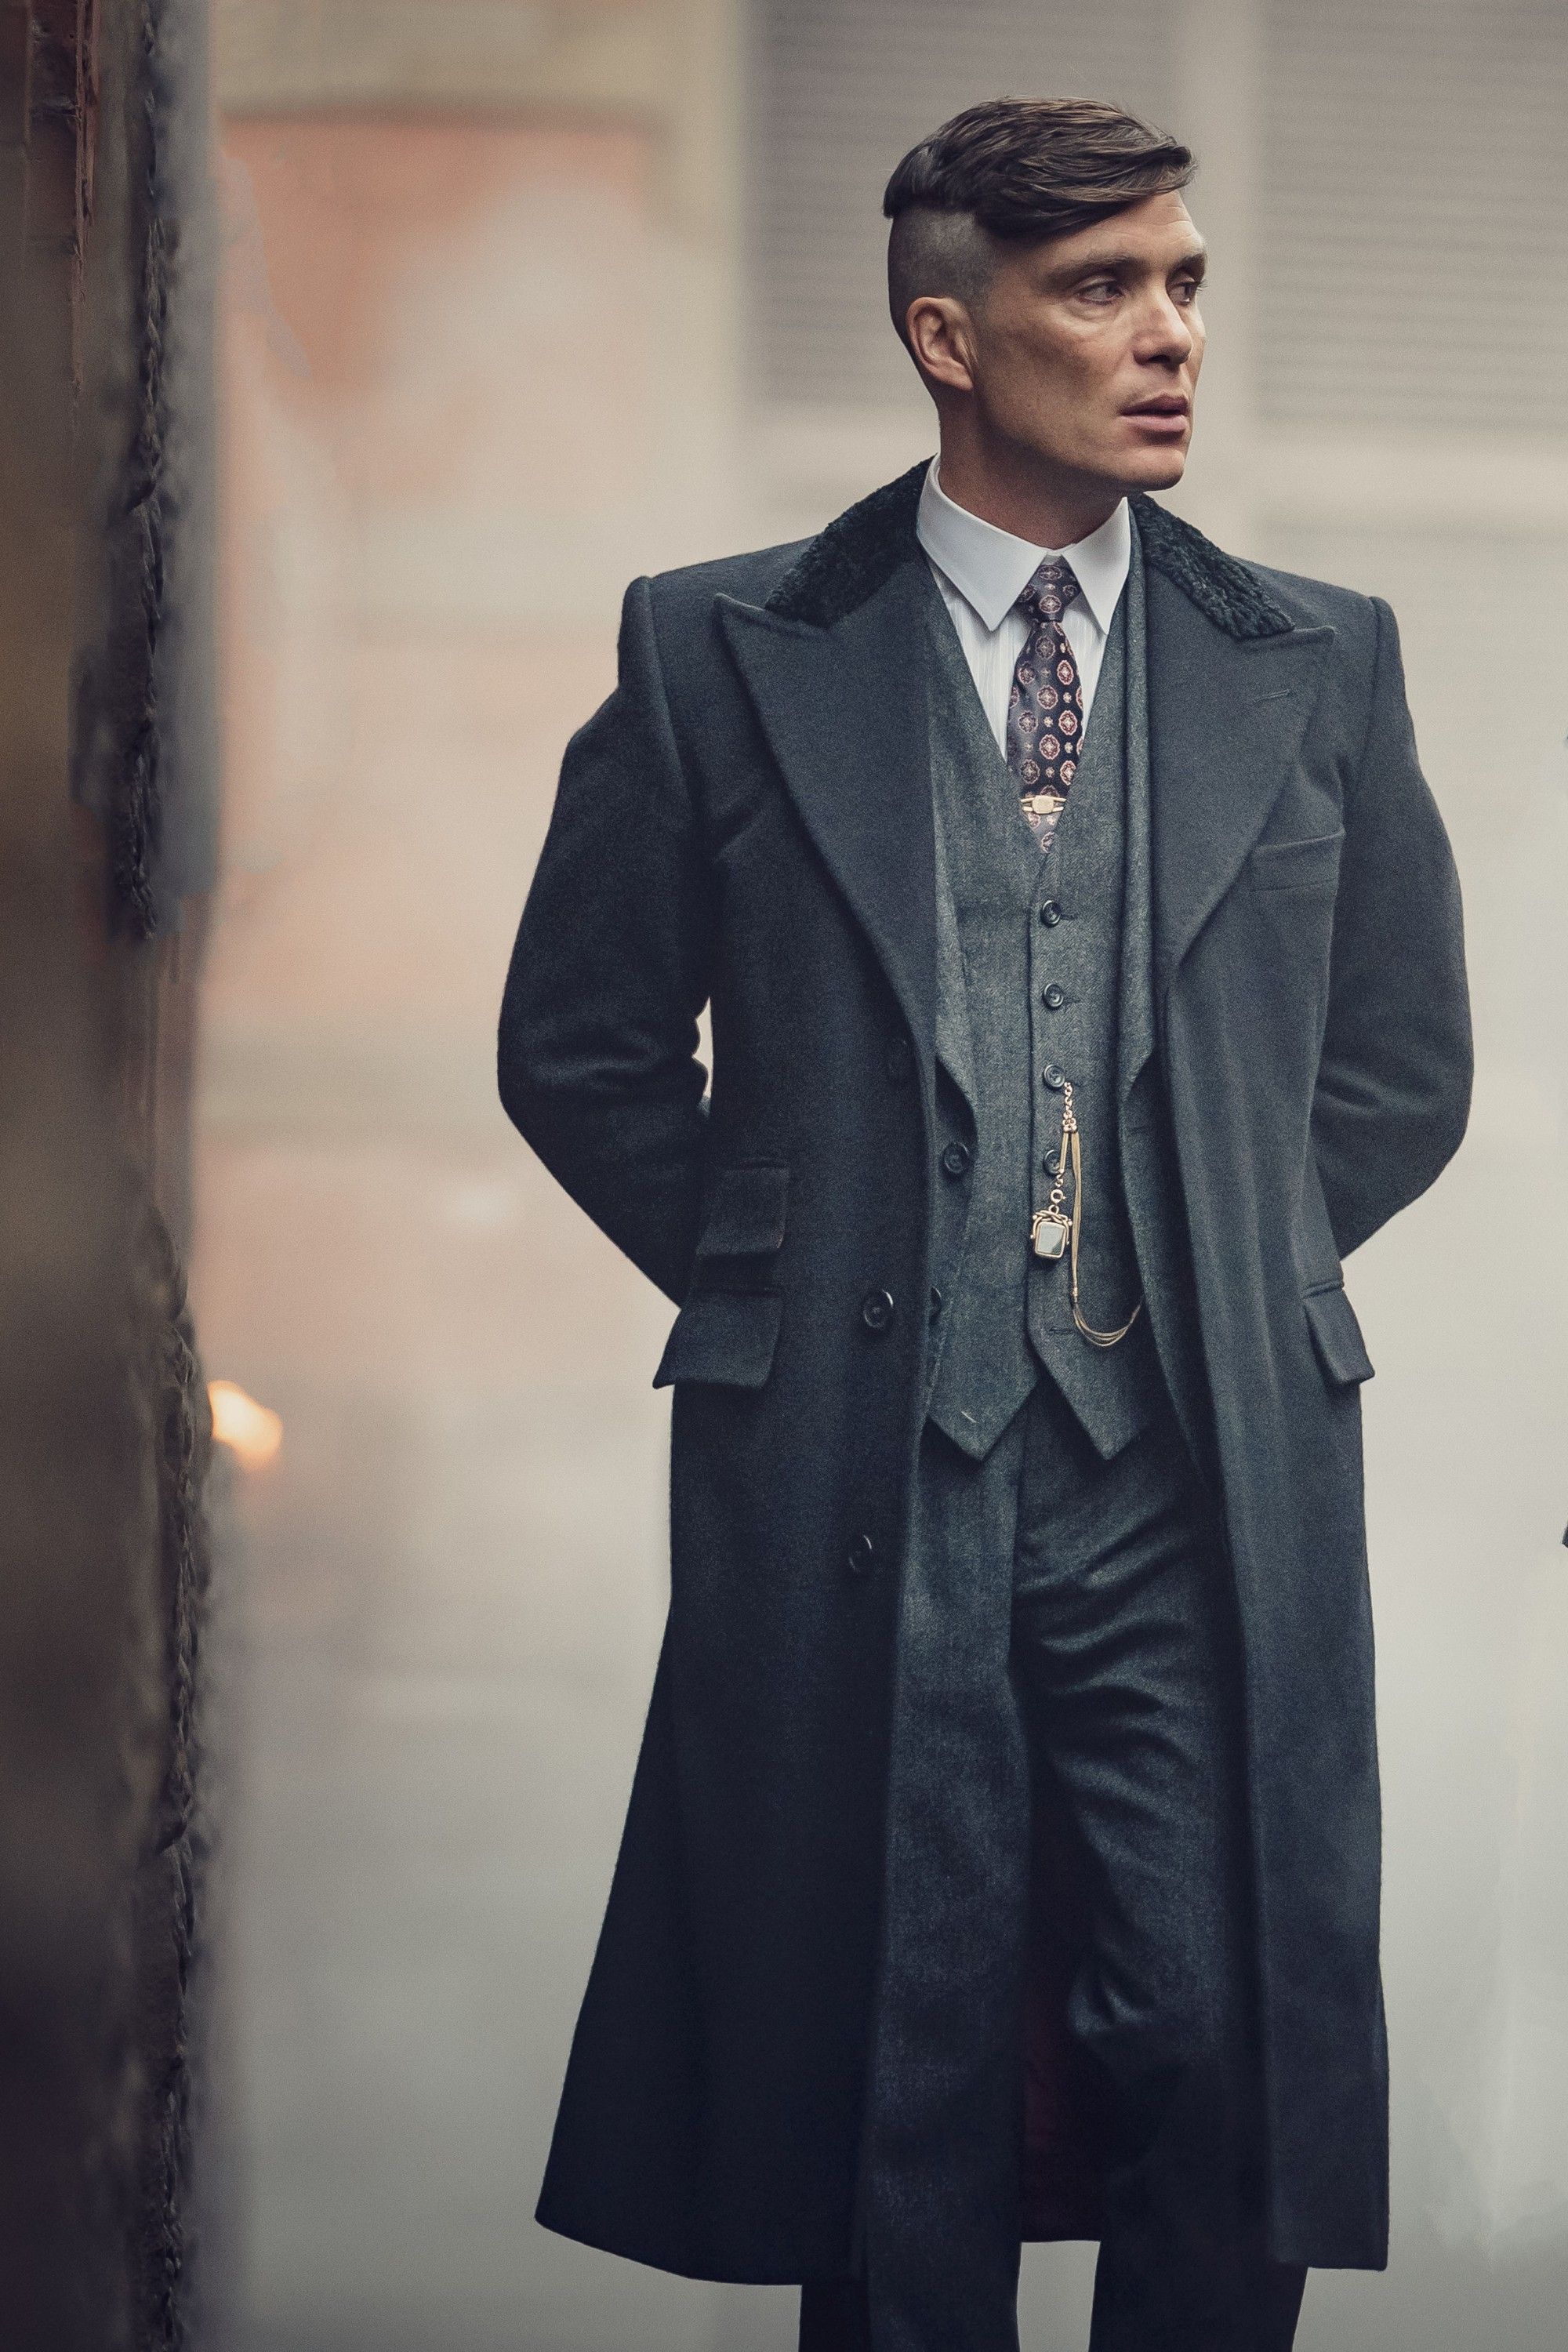 Pin by Ary on Peaky blinders | Cillian murphy, Cillian murphy peaky  blinders, Peaky blinders tommy shelby